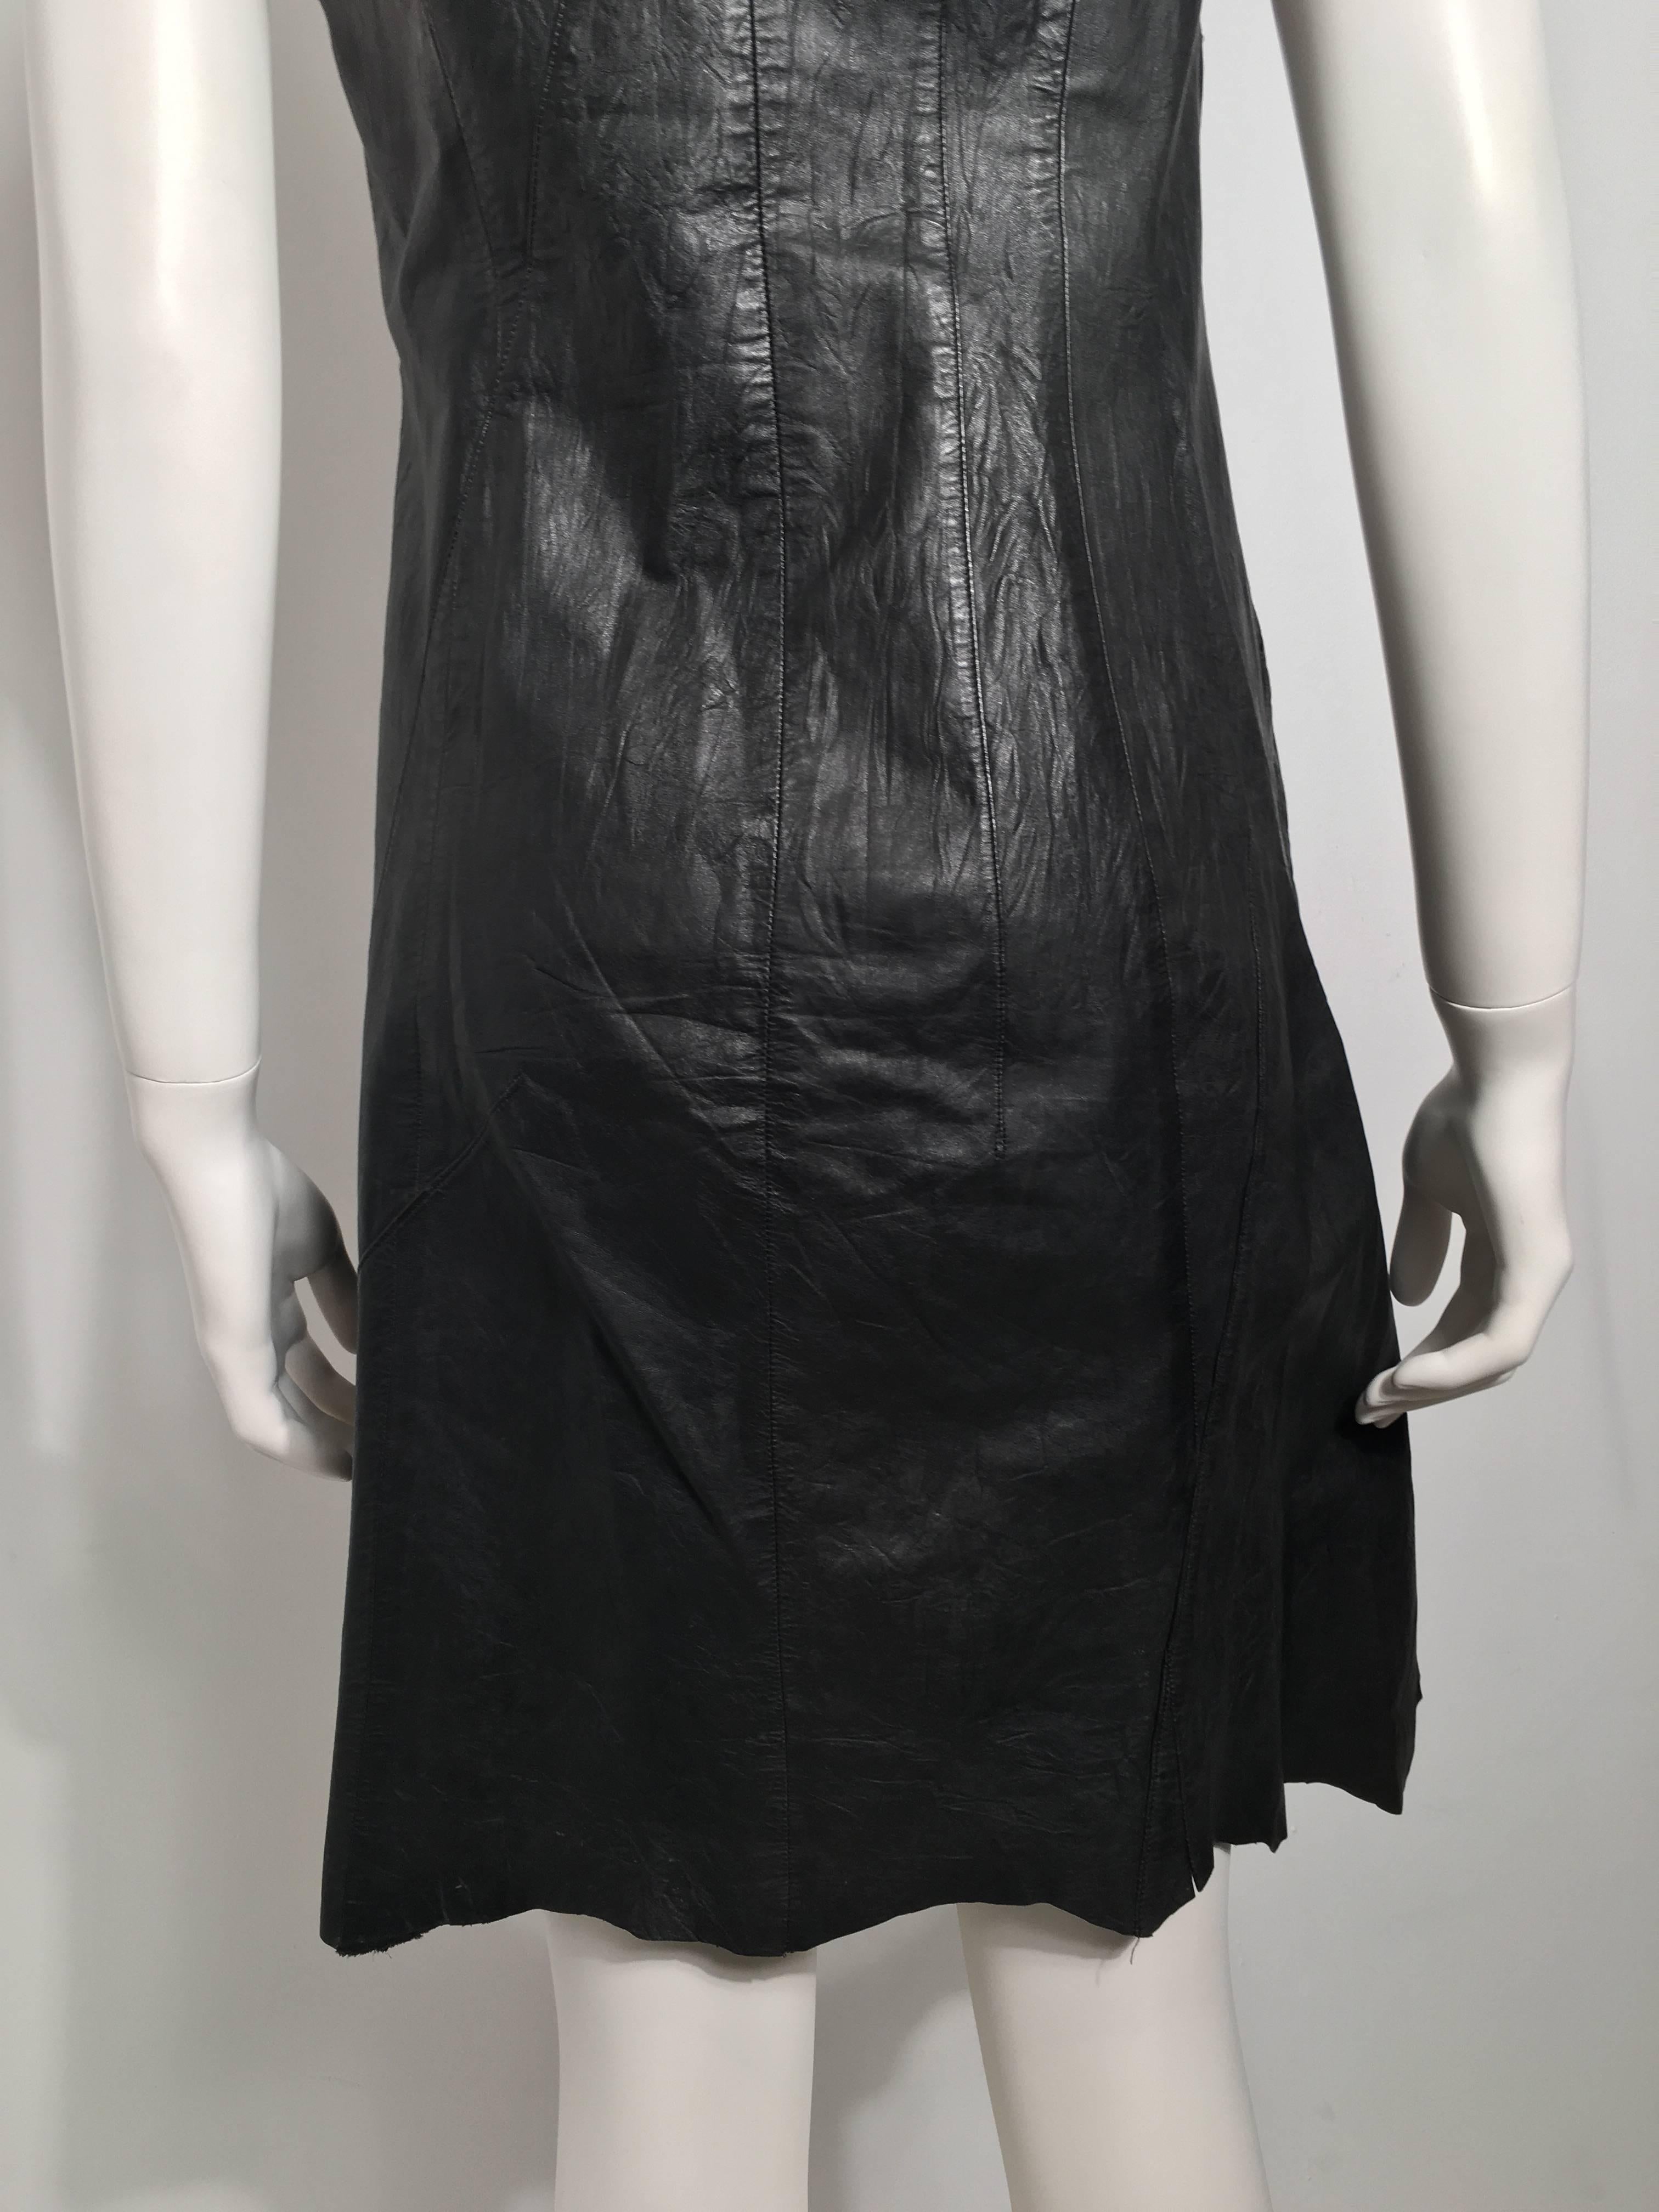 Junya Watanabe Comme des Garcons Leather Dress In Excellent Condition For Sale In New York, NY